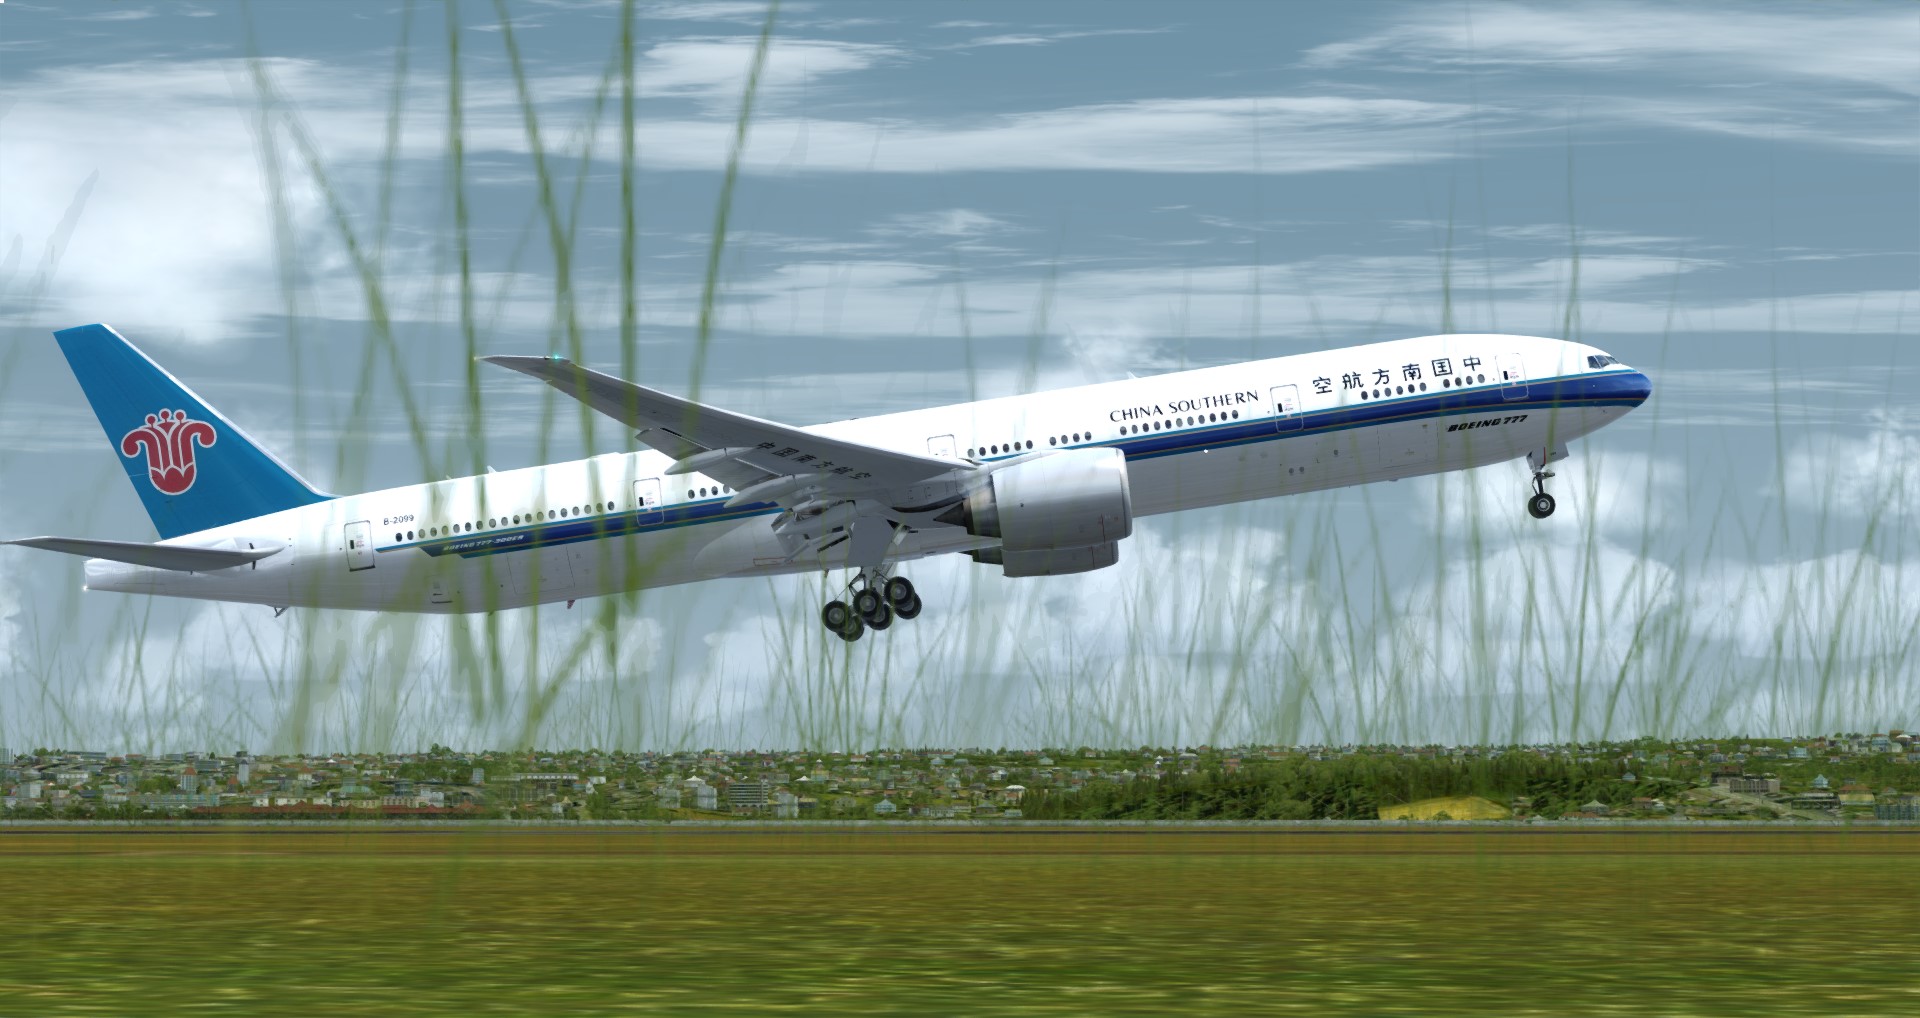 P3D V4 77W China Southern Airlines WADD-ZGGG 营救同胞-4379 